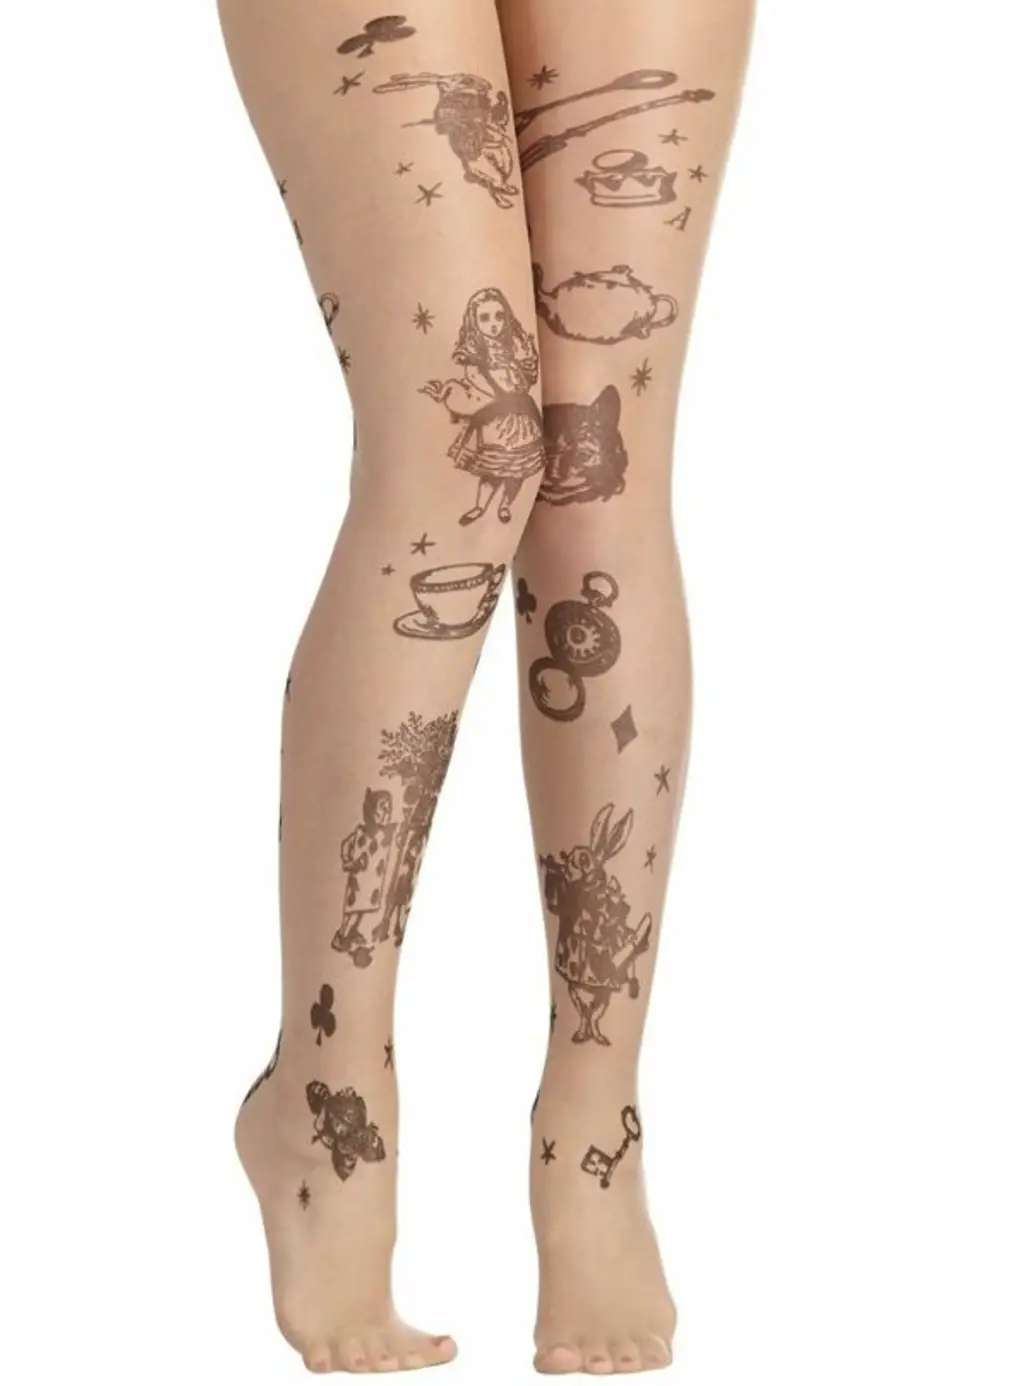 You’ve Got Character Tights